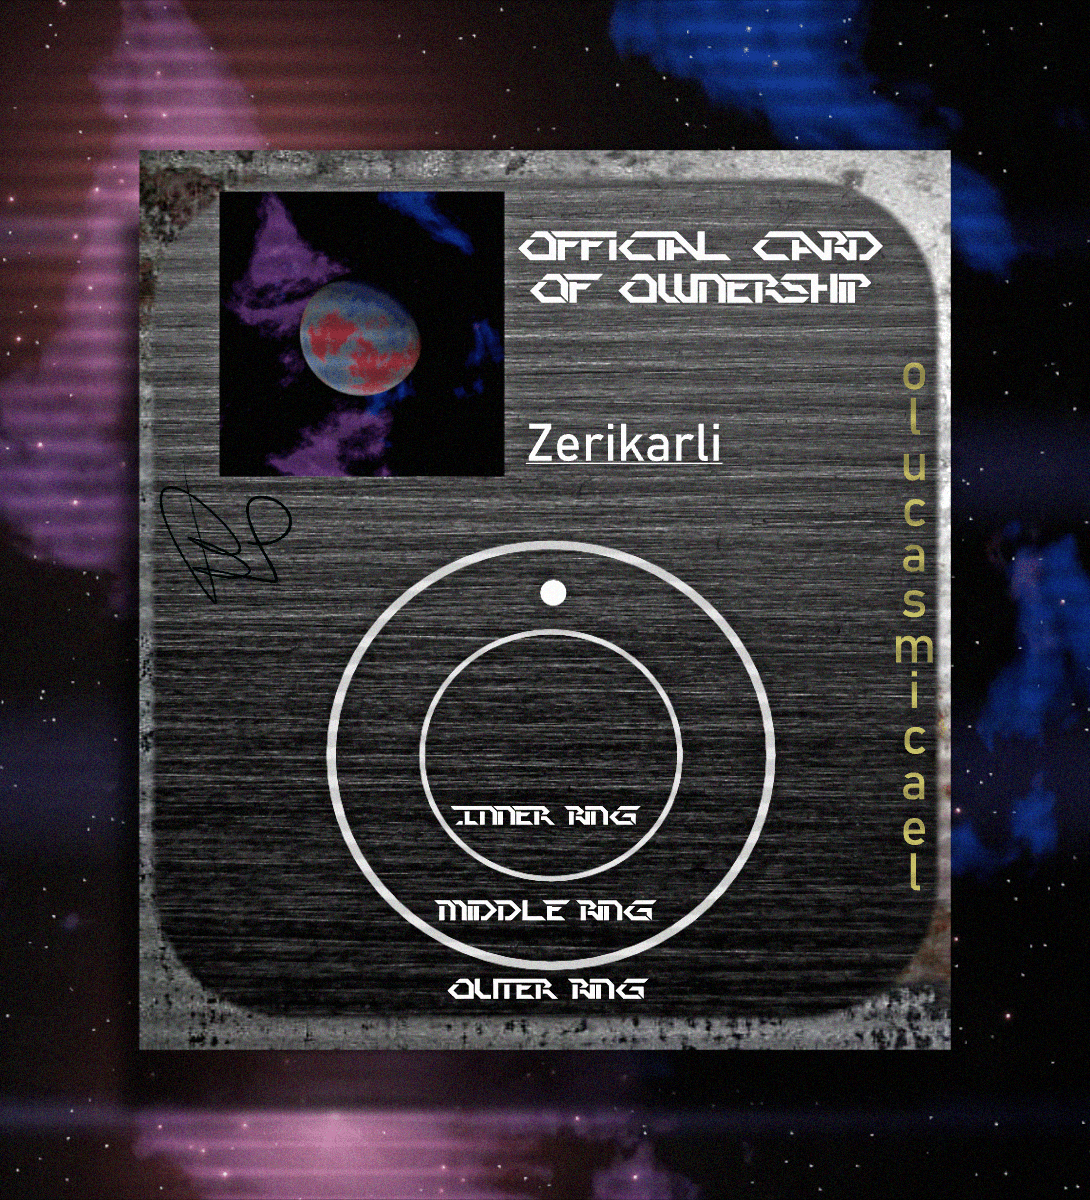 "Zerikarli" Official Card of Ownership